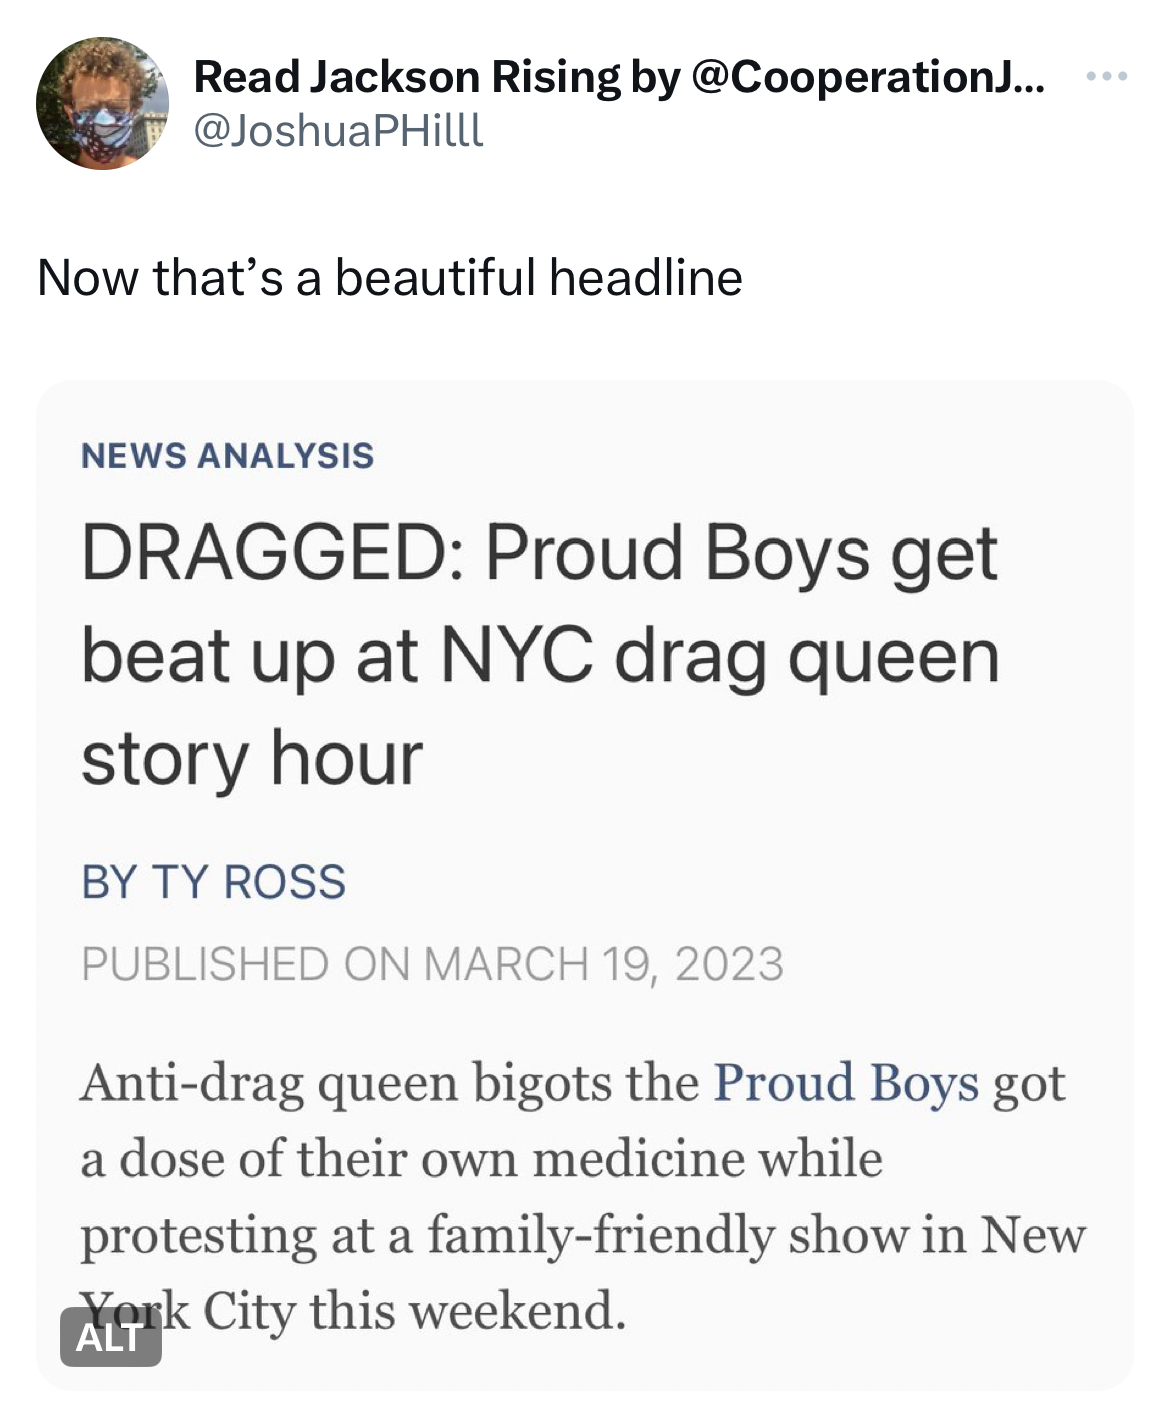 savage tweets - Mathematics - Read Jackson Rising by .... Now that's a beautiful headline News Analysis Dragged Proud Boys get beat up at Nyc drag queen story hour By Ty Ross Published On Antidrag queen bigots the Proud Boys got a dose of their own medici